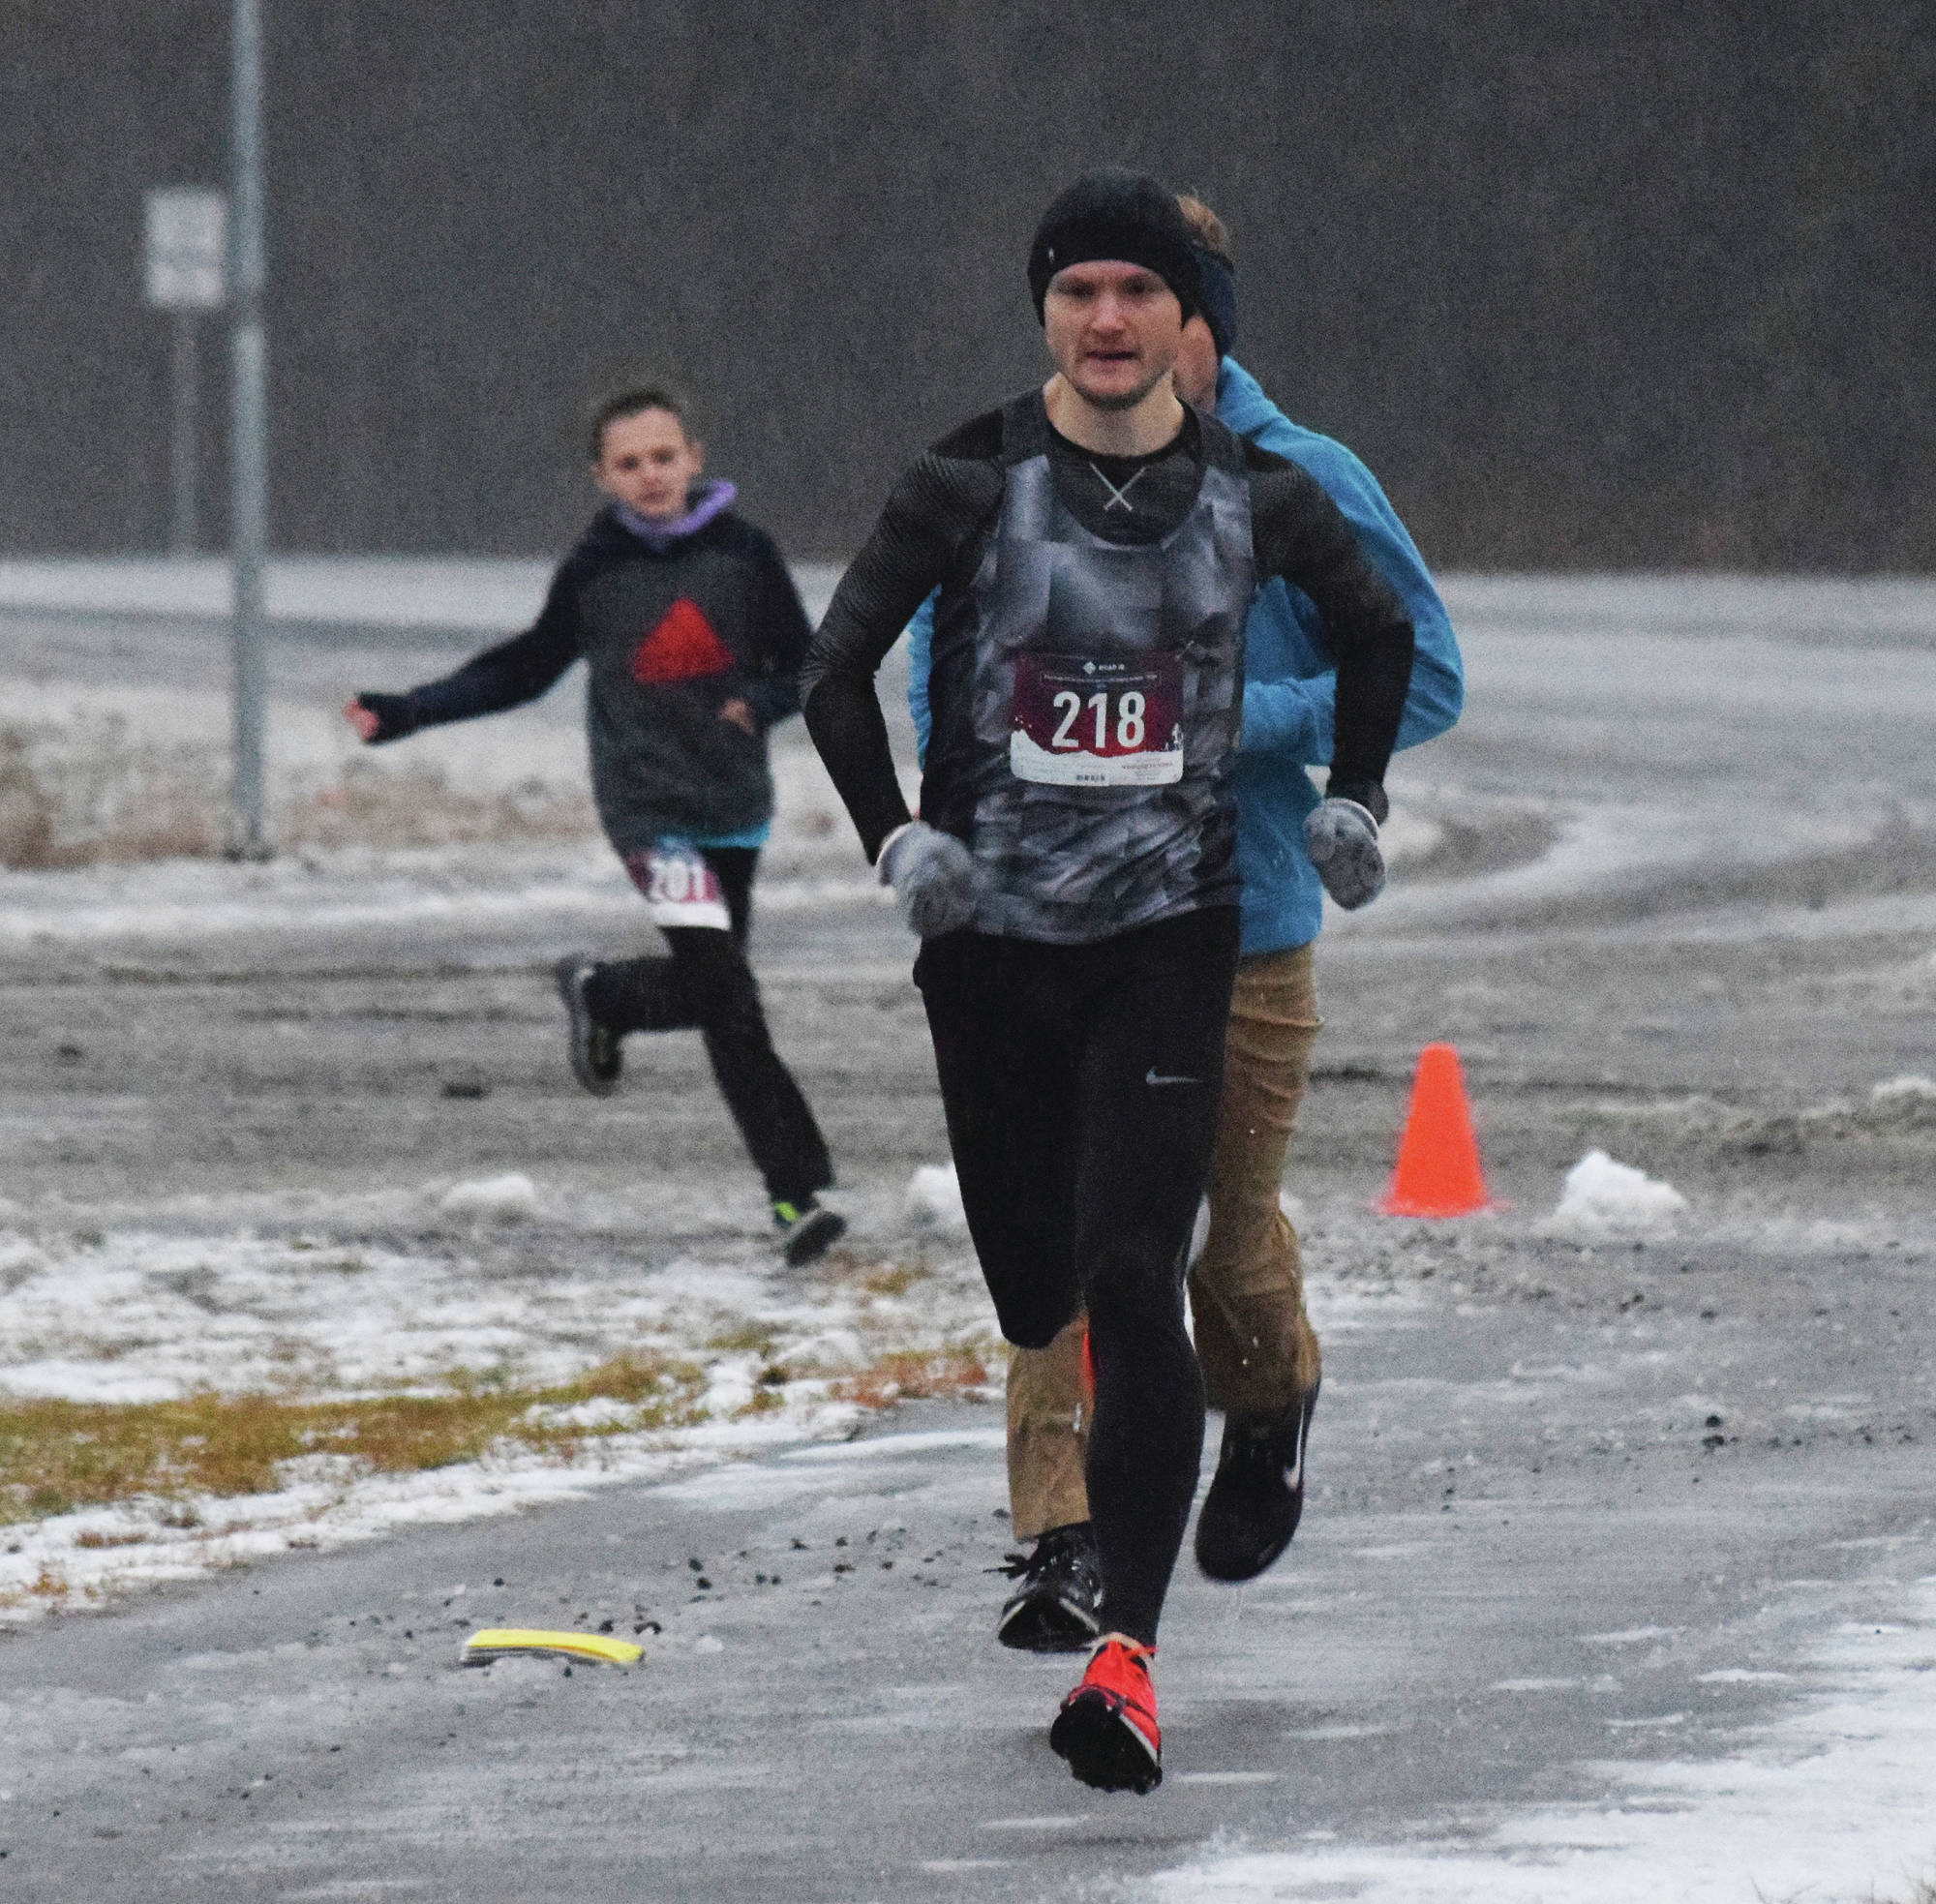 Race leader Jason Parks gets off to a fast start Thursday, Nov. 28, 2019, at the Turkey Trot in Soldotna, Alaska. (Photo by Joey Klecka/Peninsula Clarion)